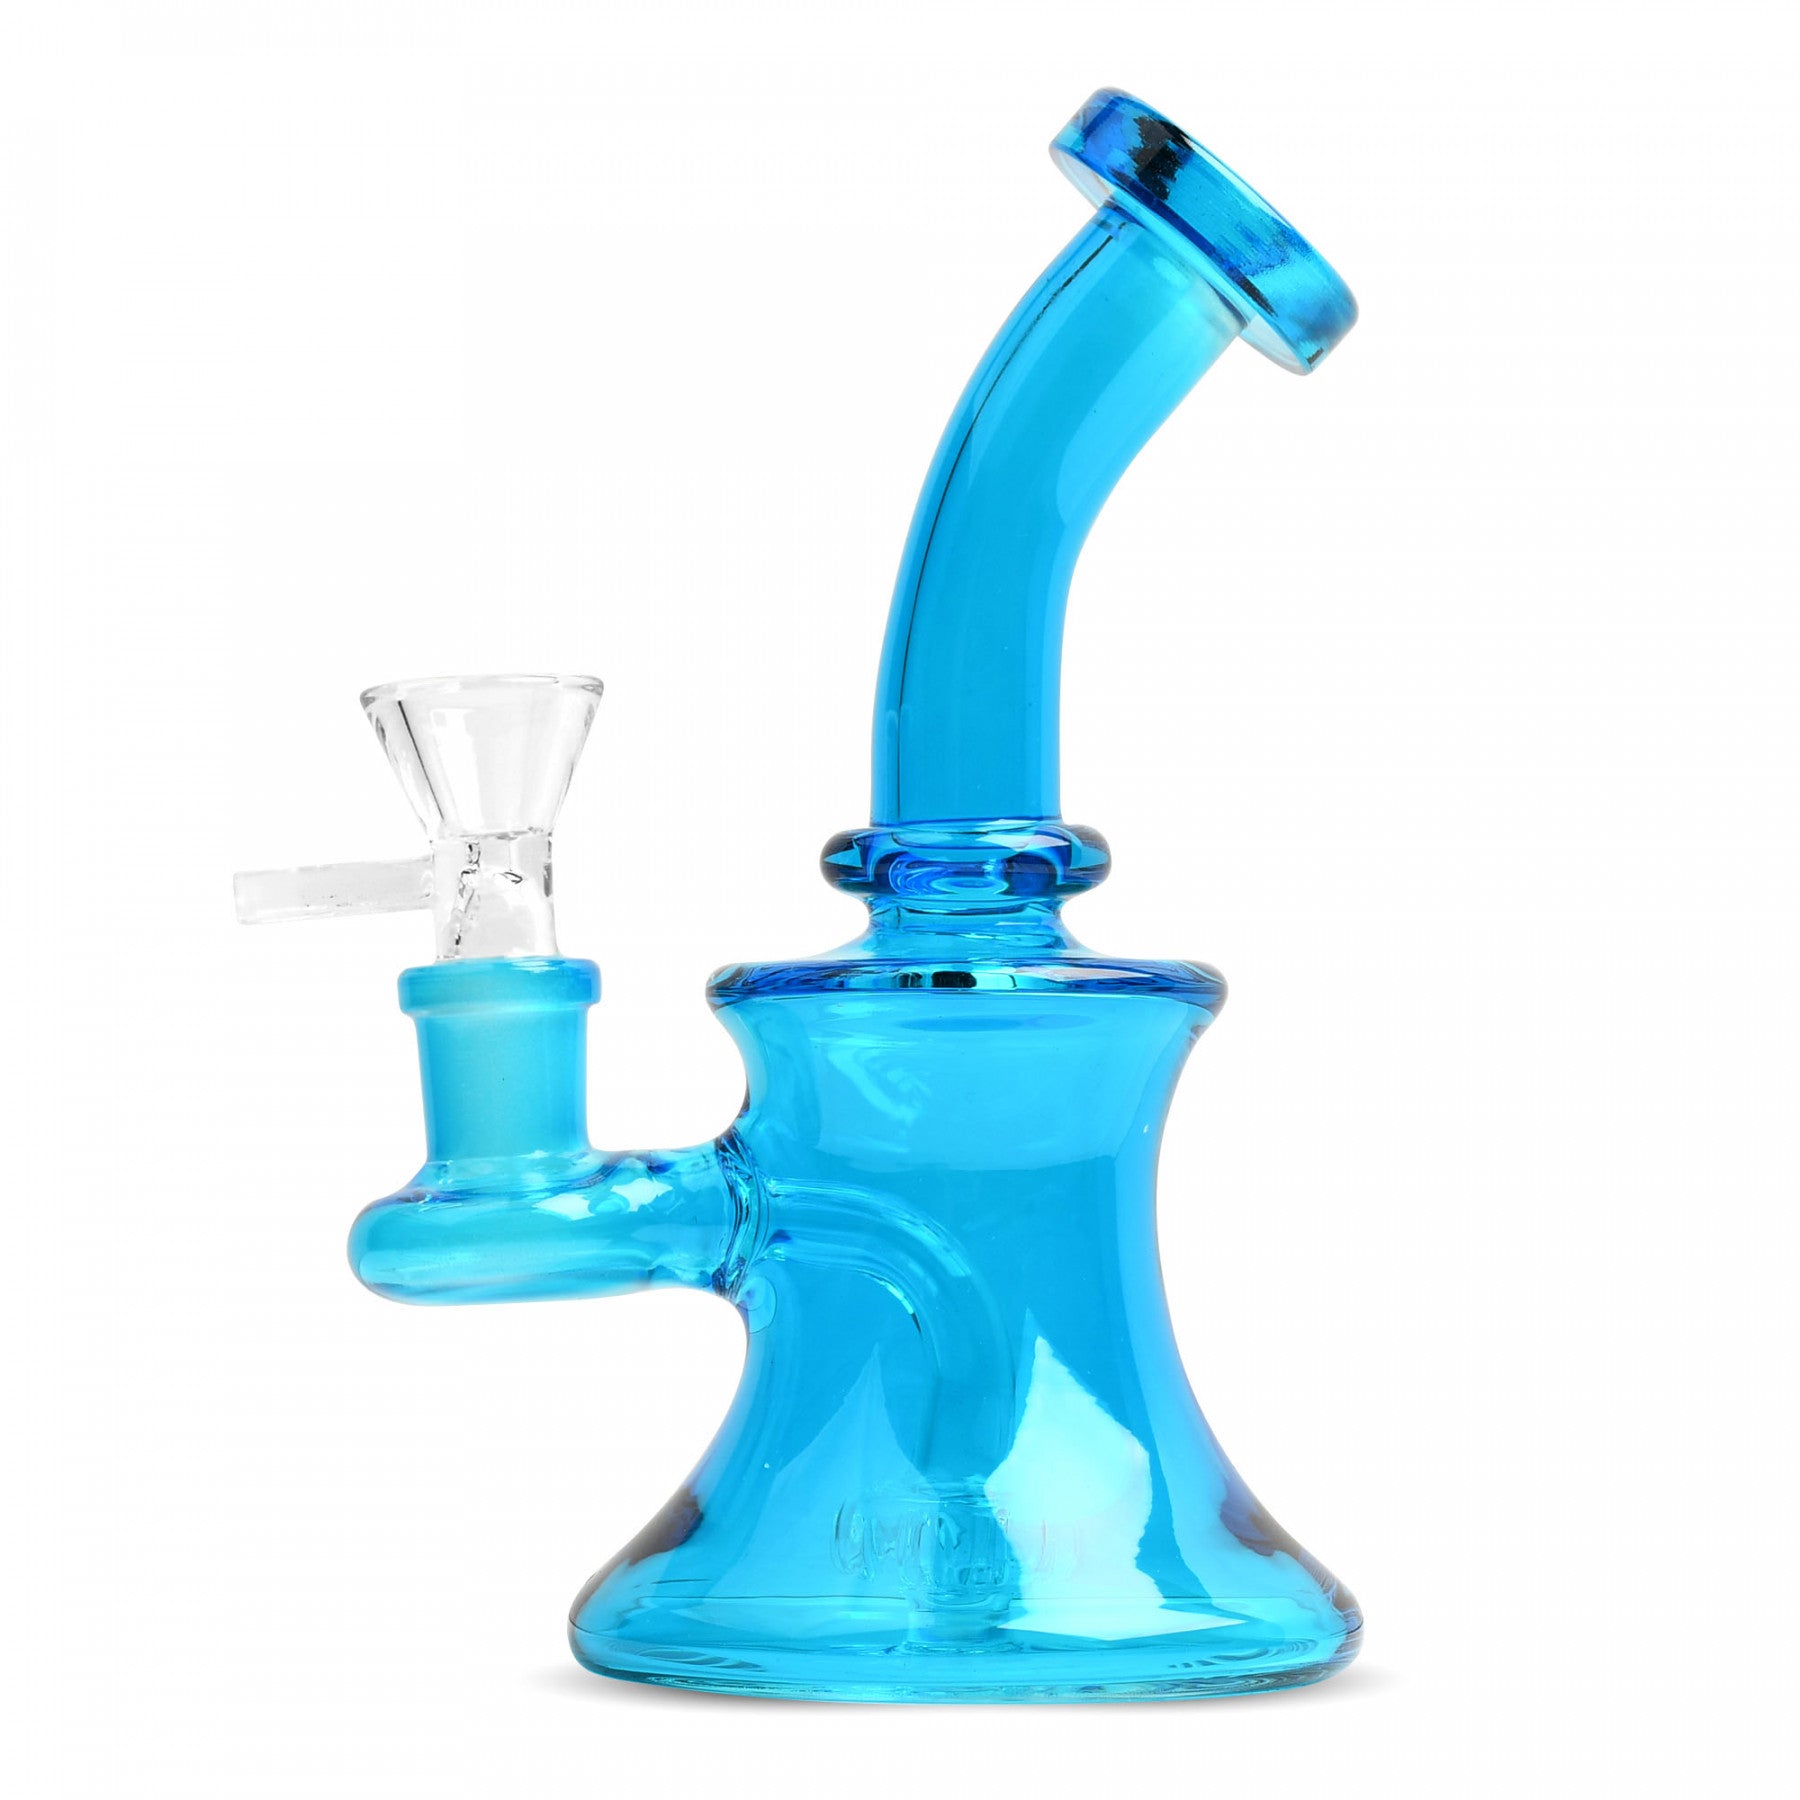 Dayglo blue 5 inch bubbler with percolator down stem